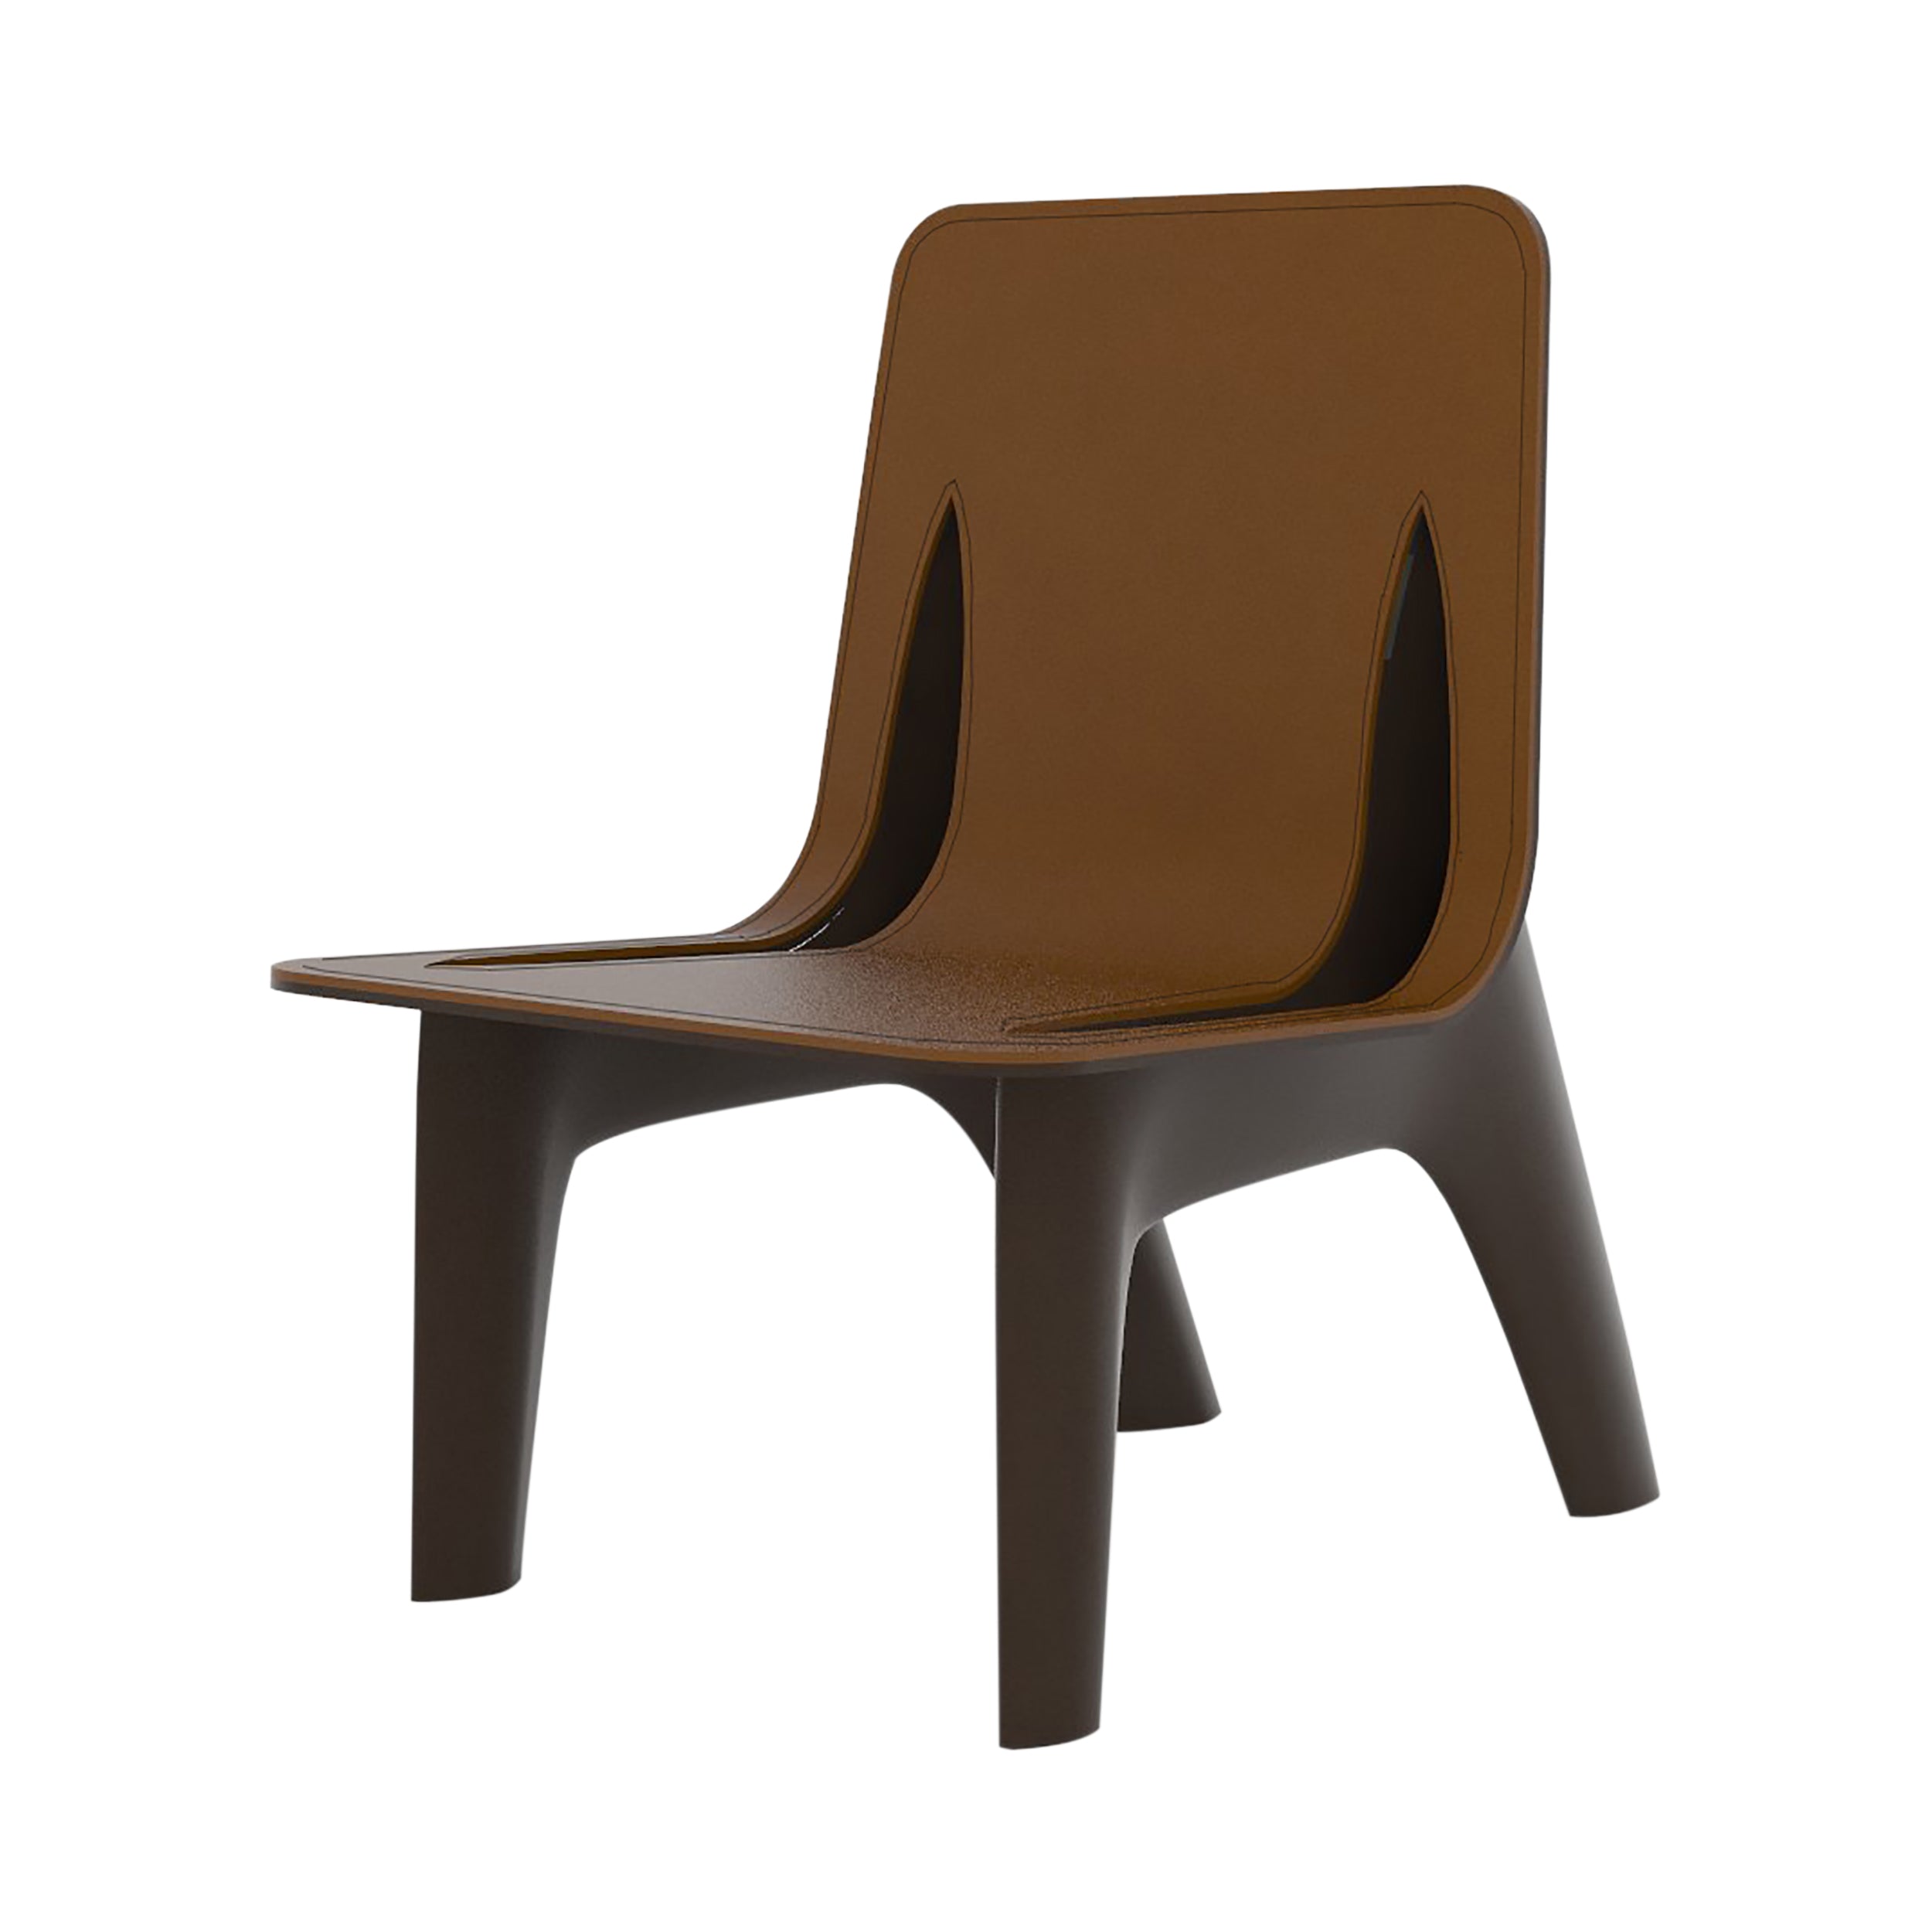 J-Chair: Leather Seat + Aluminum + Brown